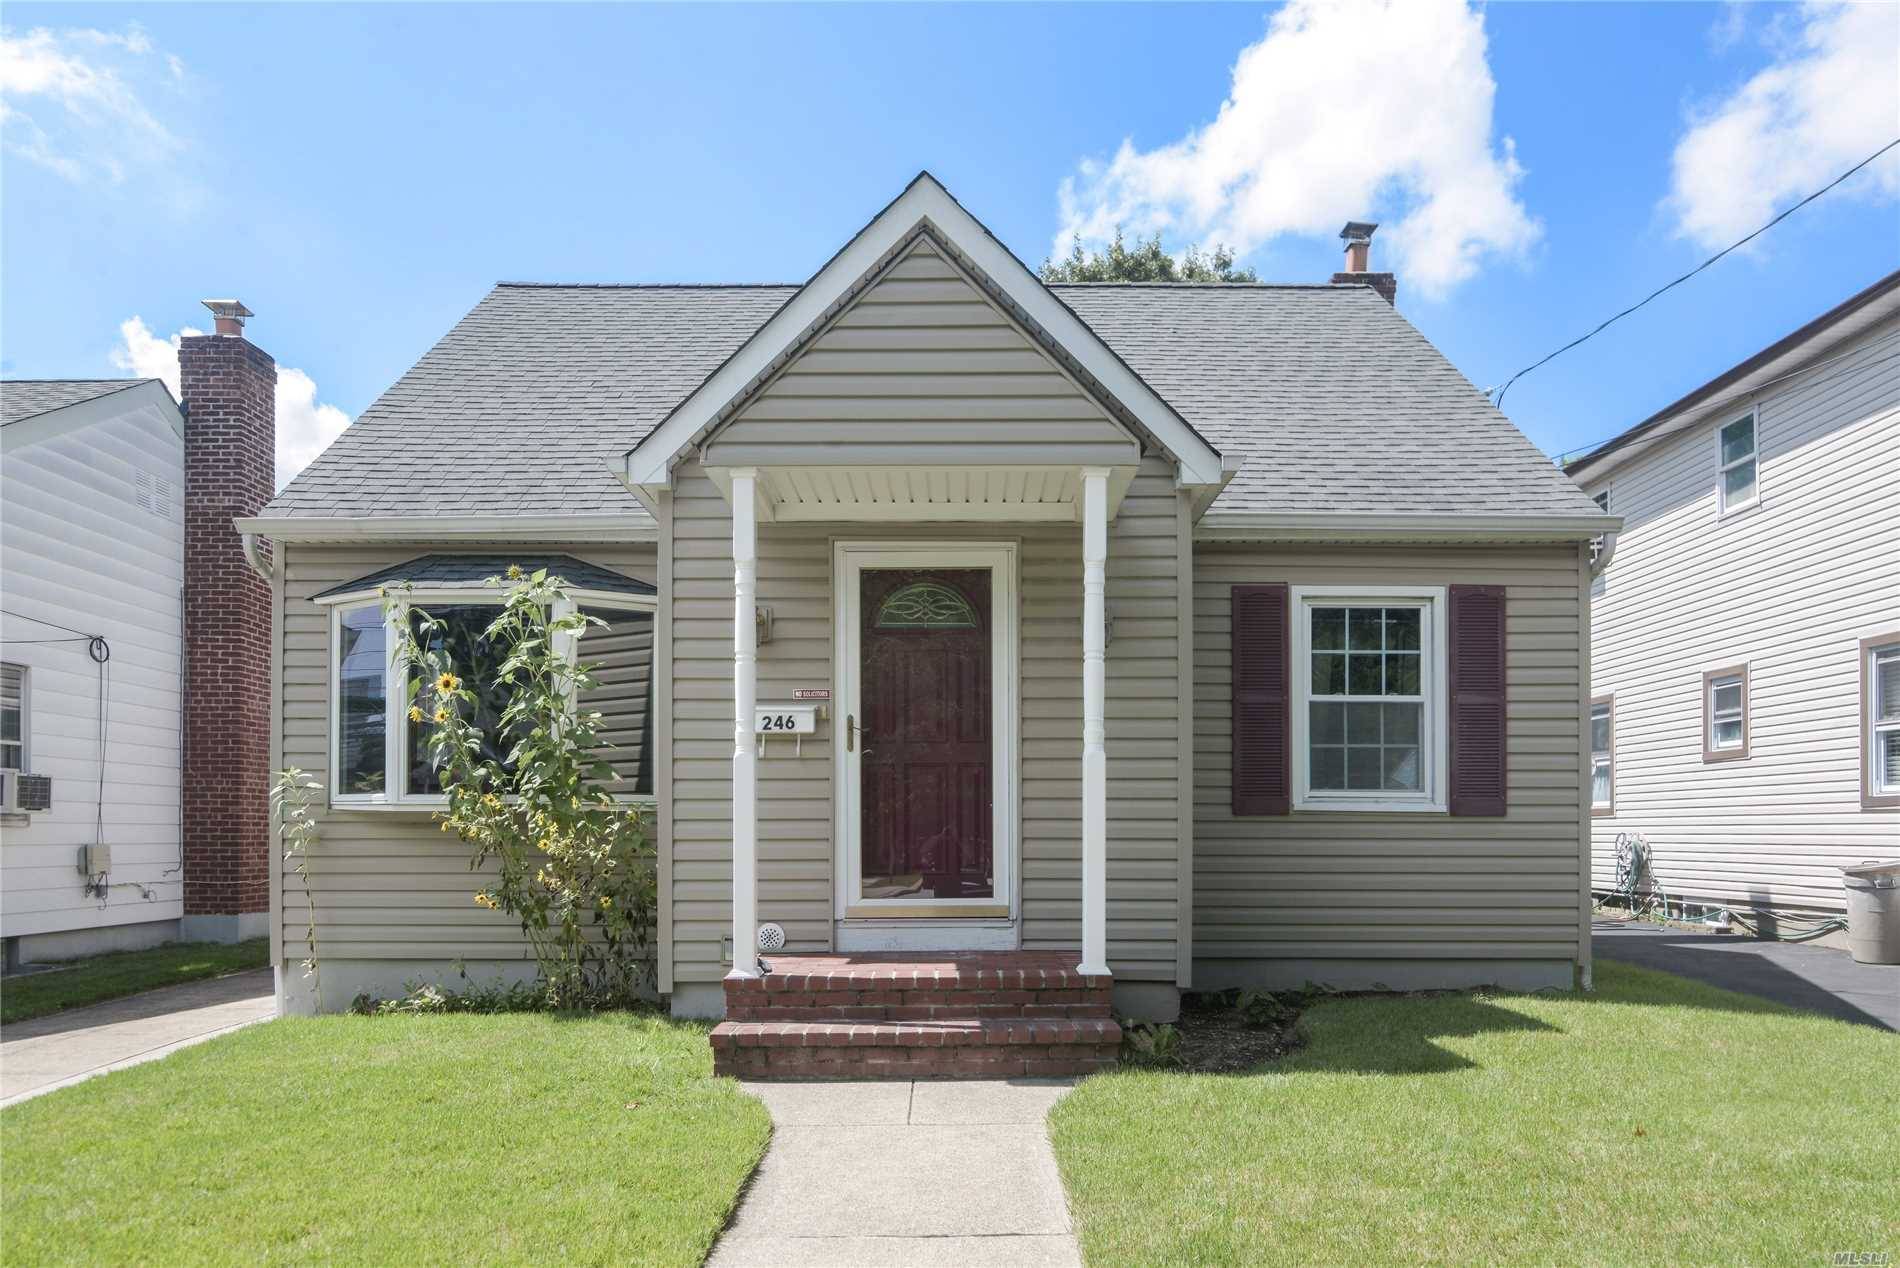 Must See This Incredible, Move-In Condition 3 Br, 2 Full Bath Cape.